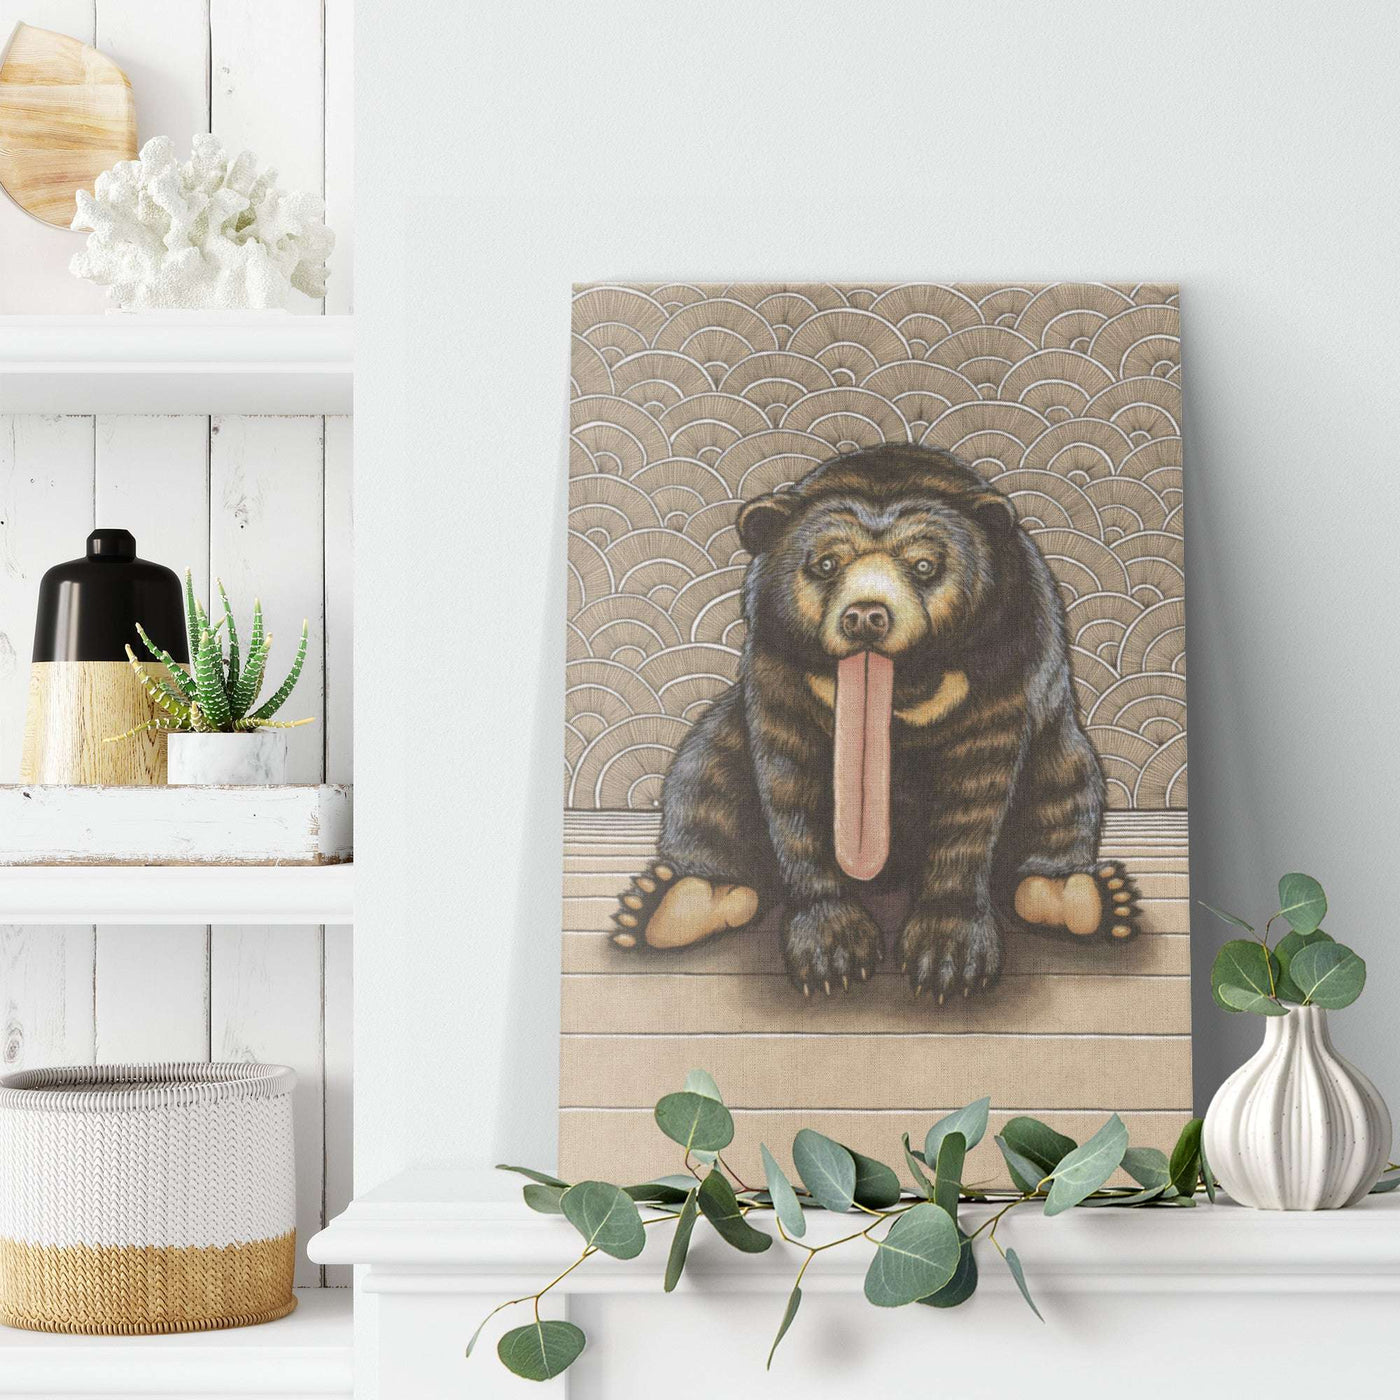 Art print of a Canvas Sun Bear Print with exaggerated features, positioned on a shelf amidst decorative items in a stylish room.